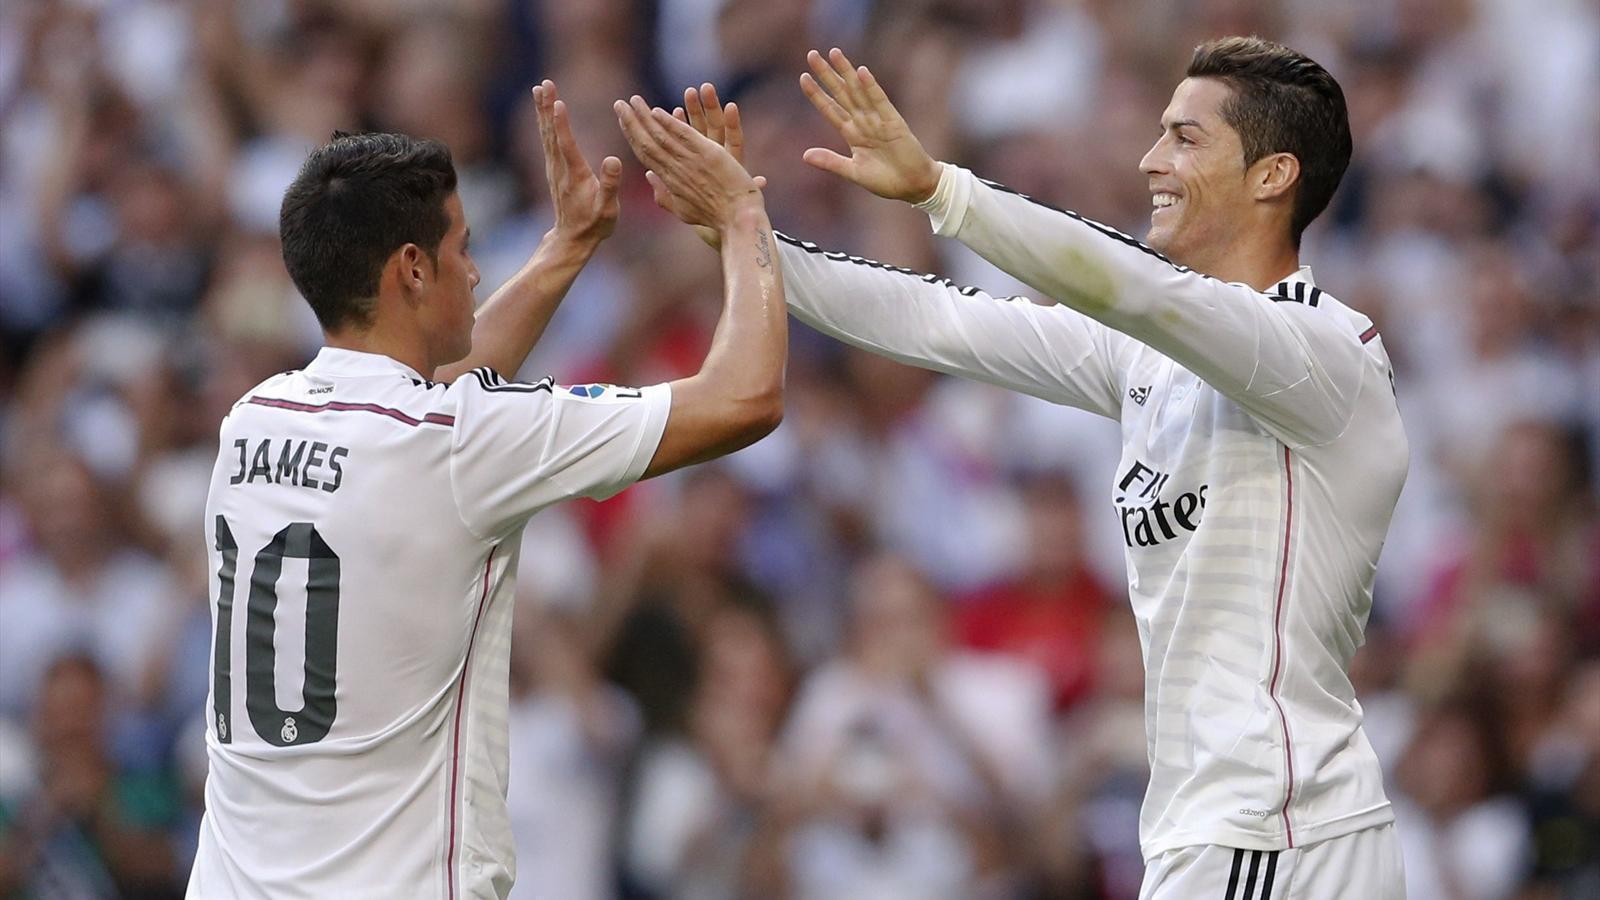 Real Madrid come from behind to beat Barcelona in Clasico classic